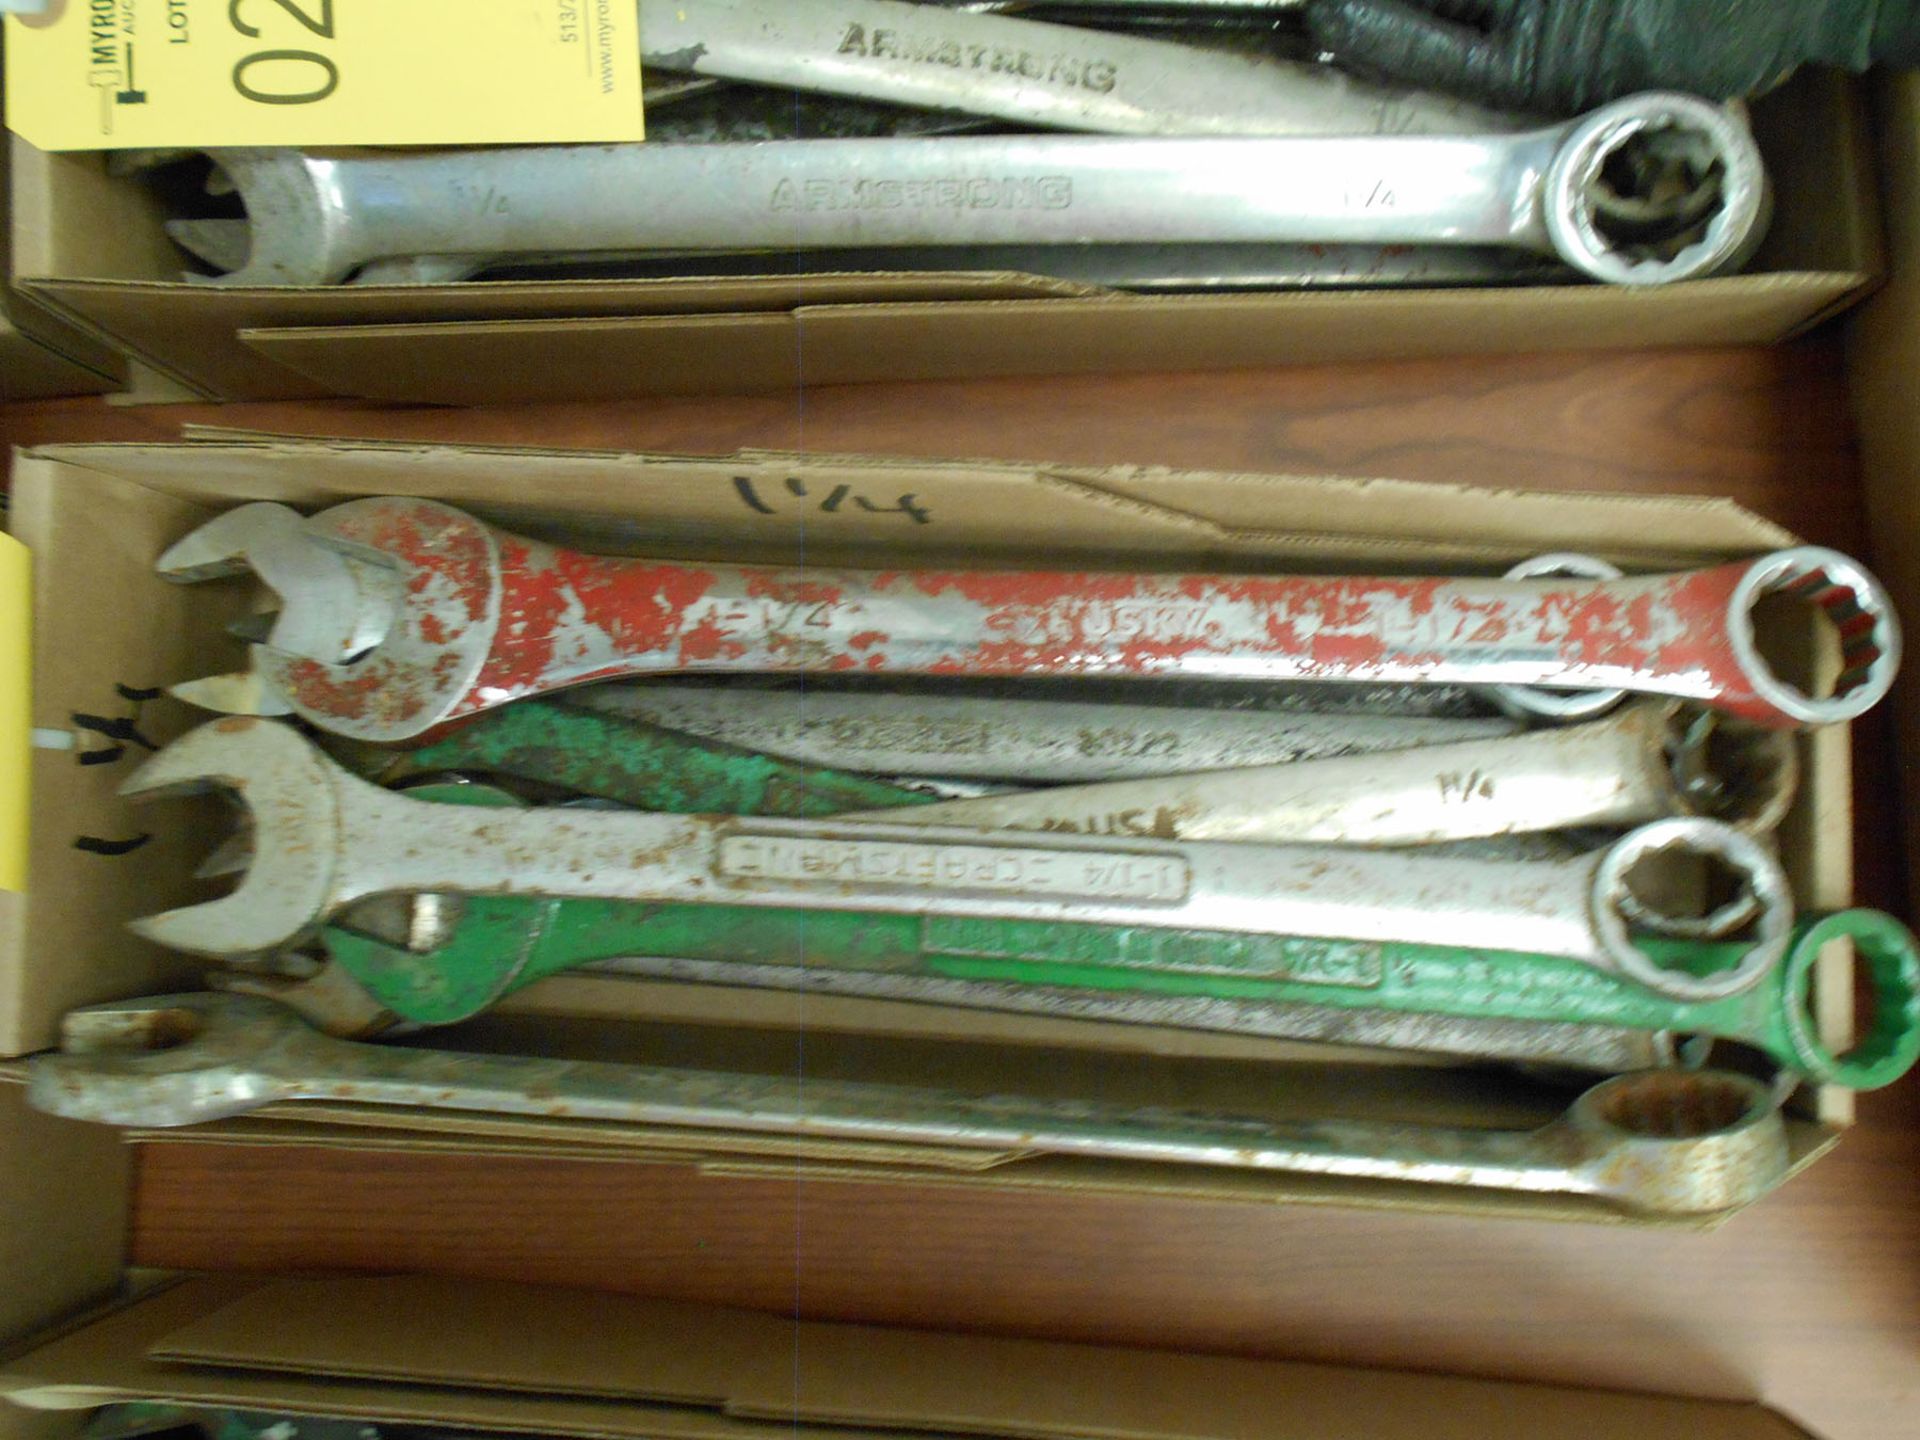 LOT OF 1 1/4'' COMBO WRENCHES